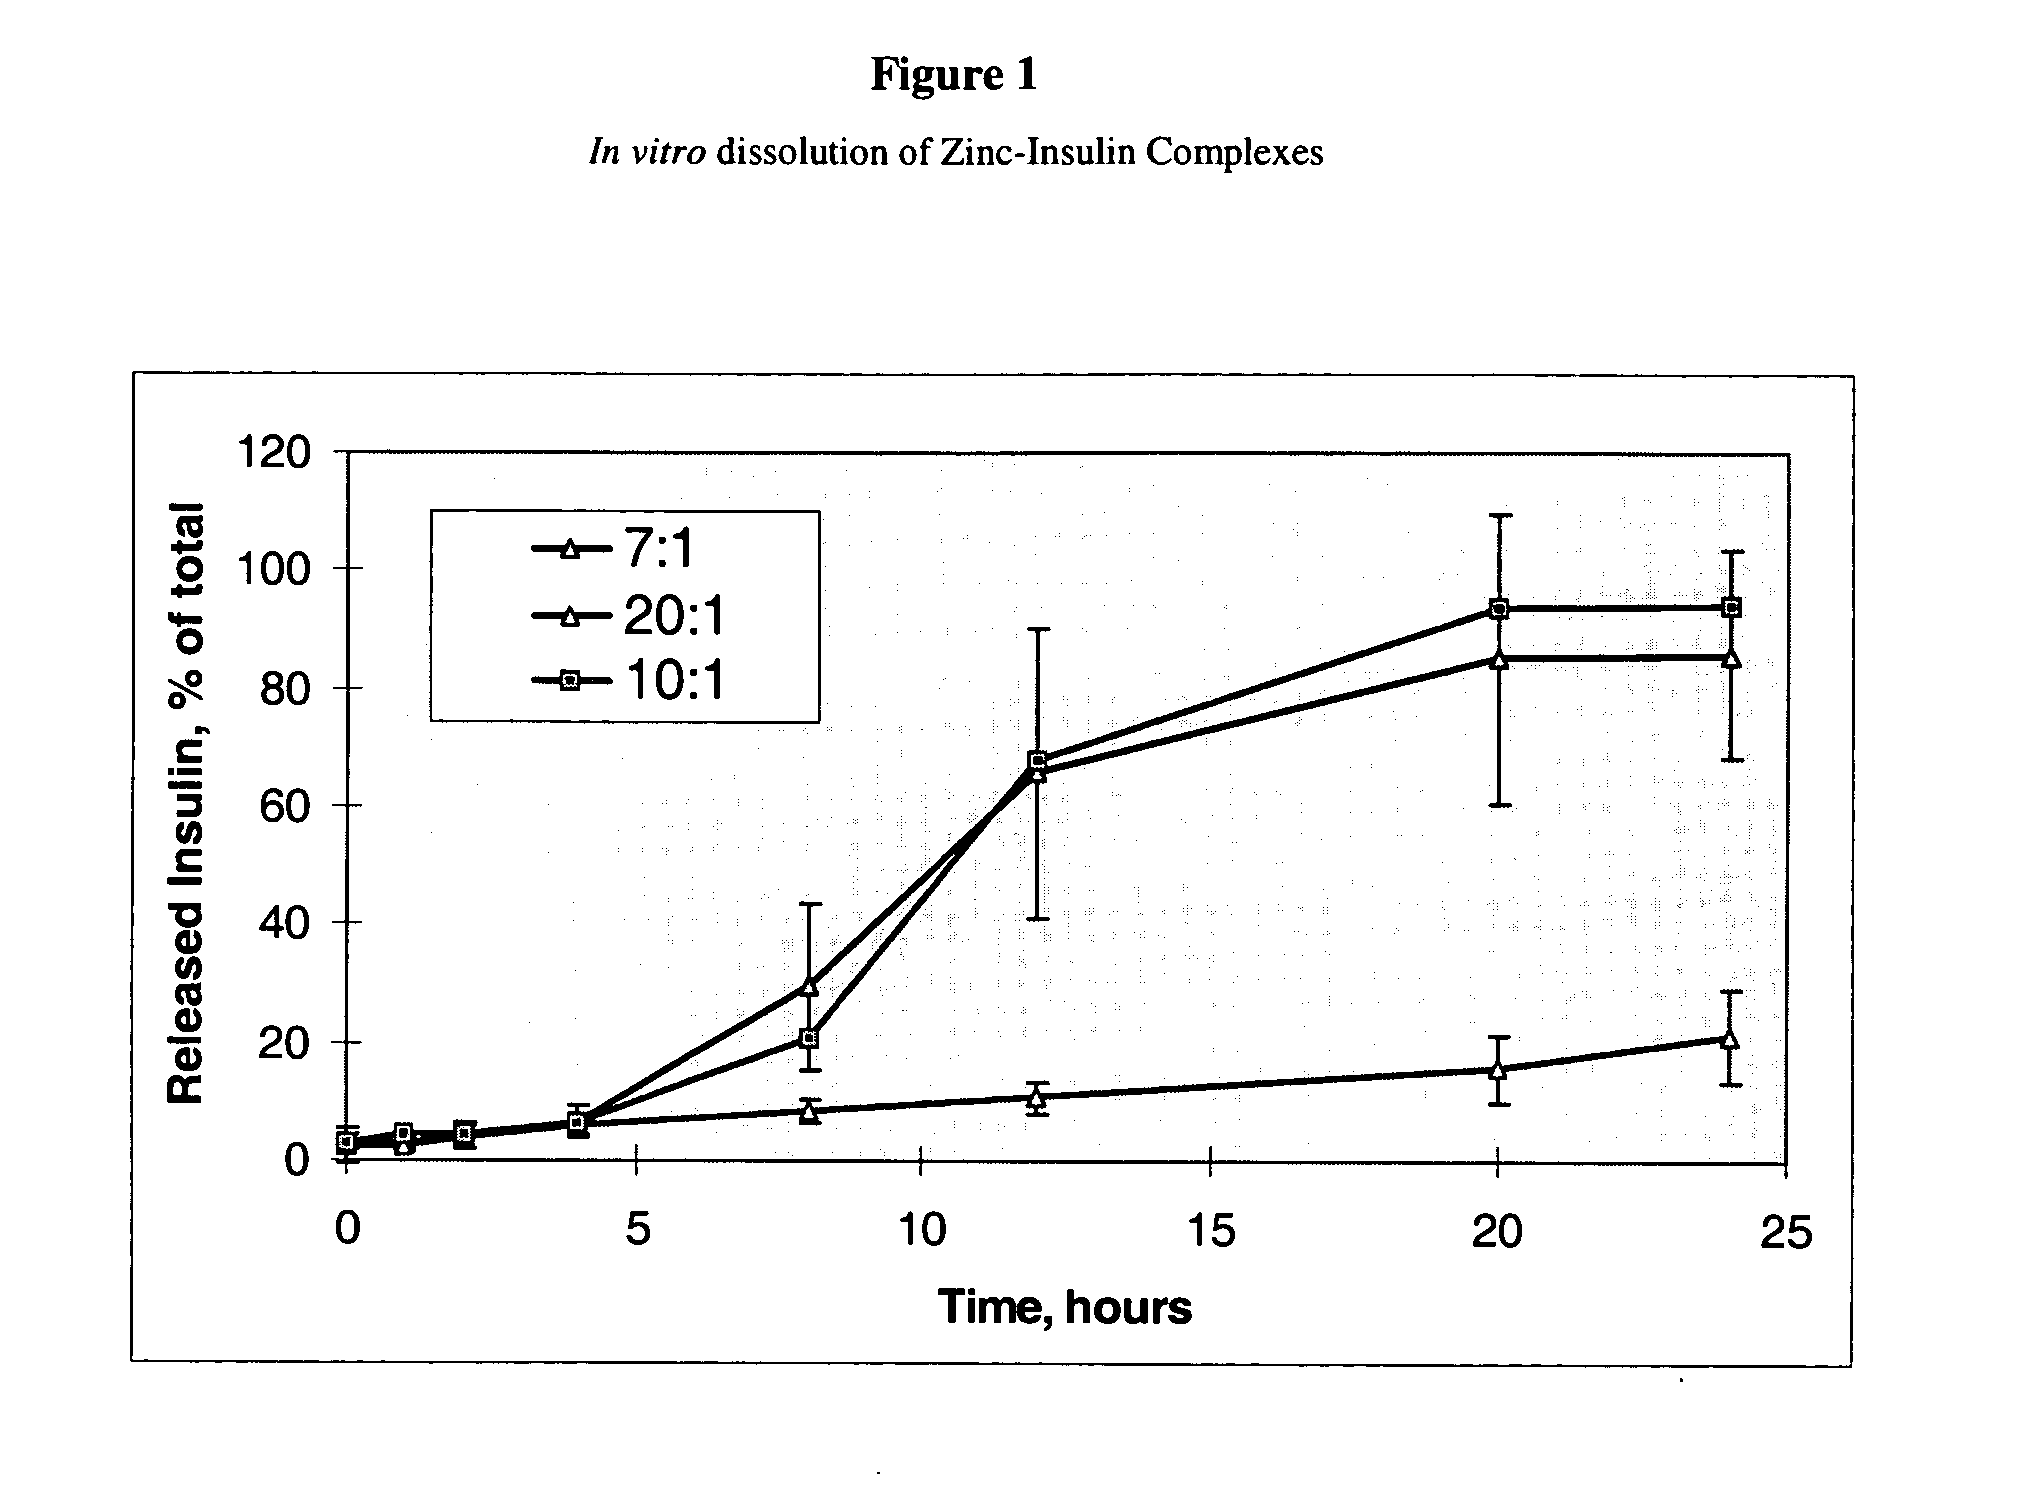 Sustained release compositions for delivery of pharmaceutical proteins